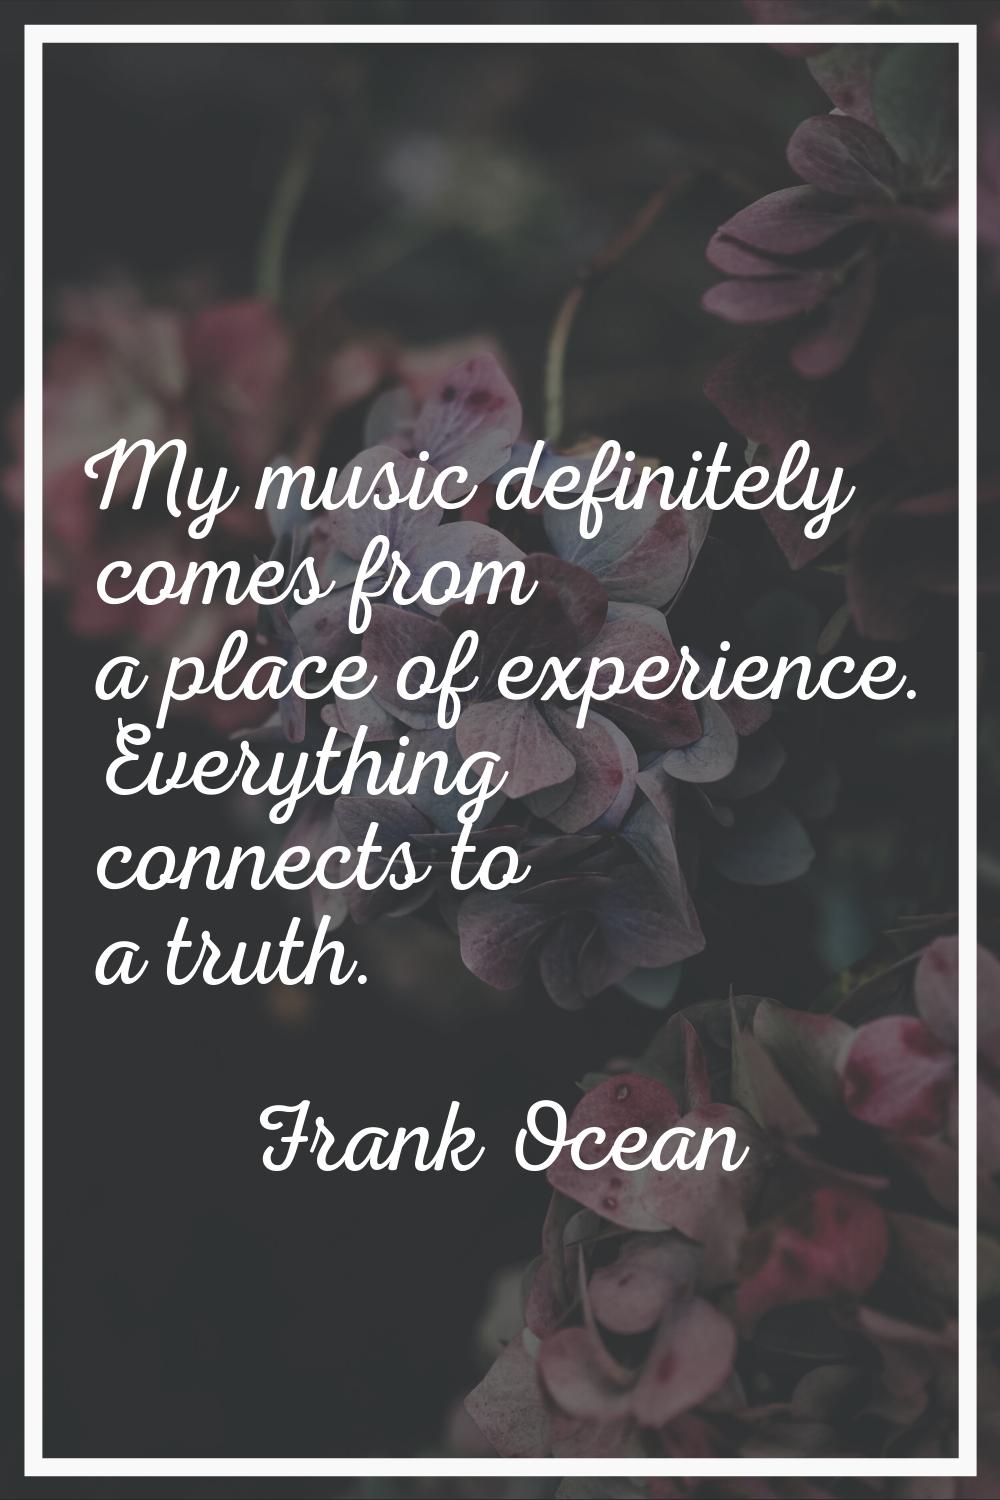 My music definitely comes from a place of experience. Everything connects to a truth.